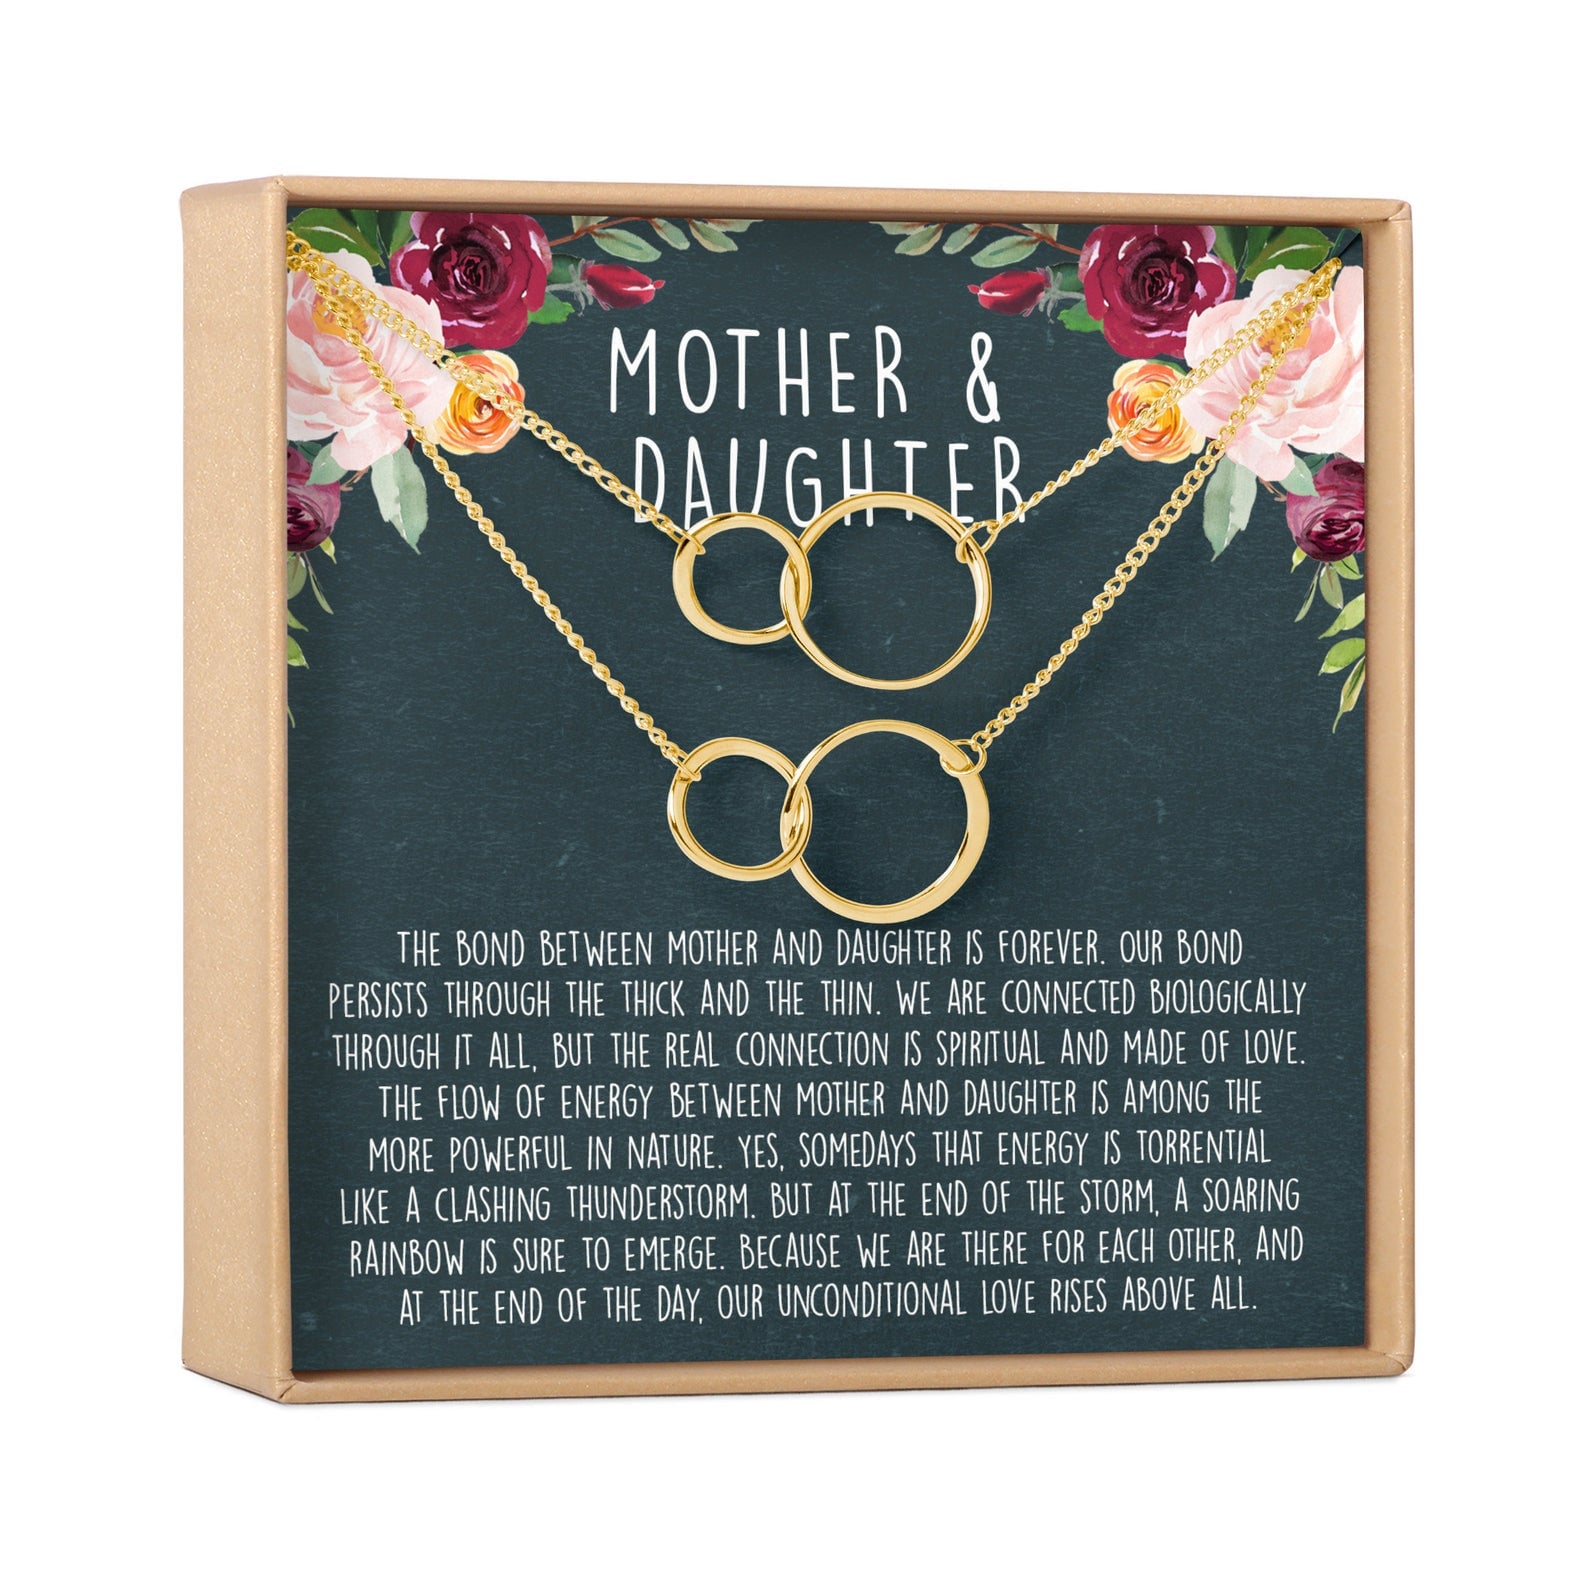 10 Meaningful Gifts for Mom to Create the Perfect Mother's Day Surprise |  Fusion Furniture Inc.